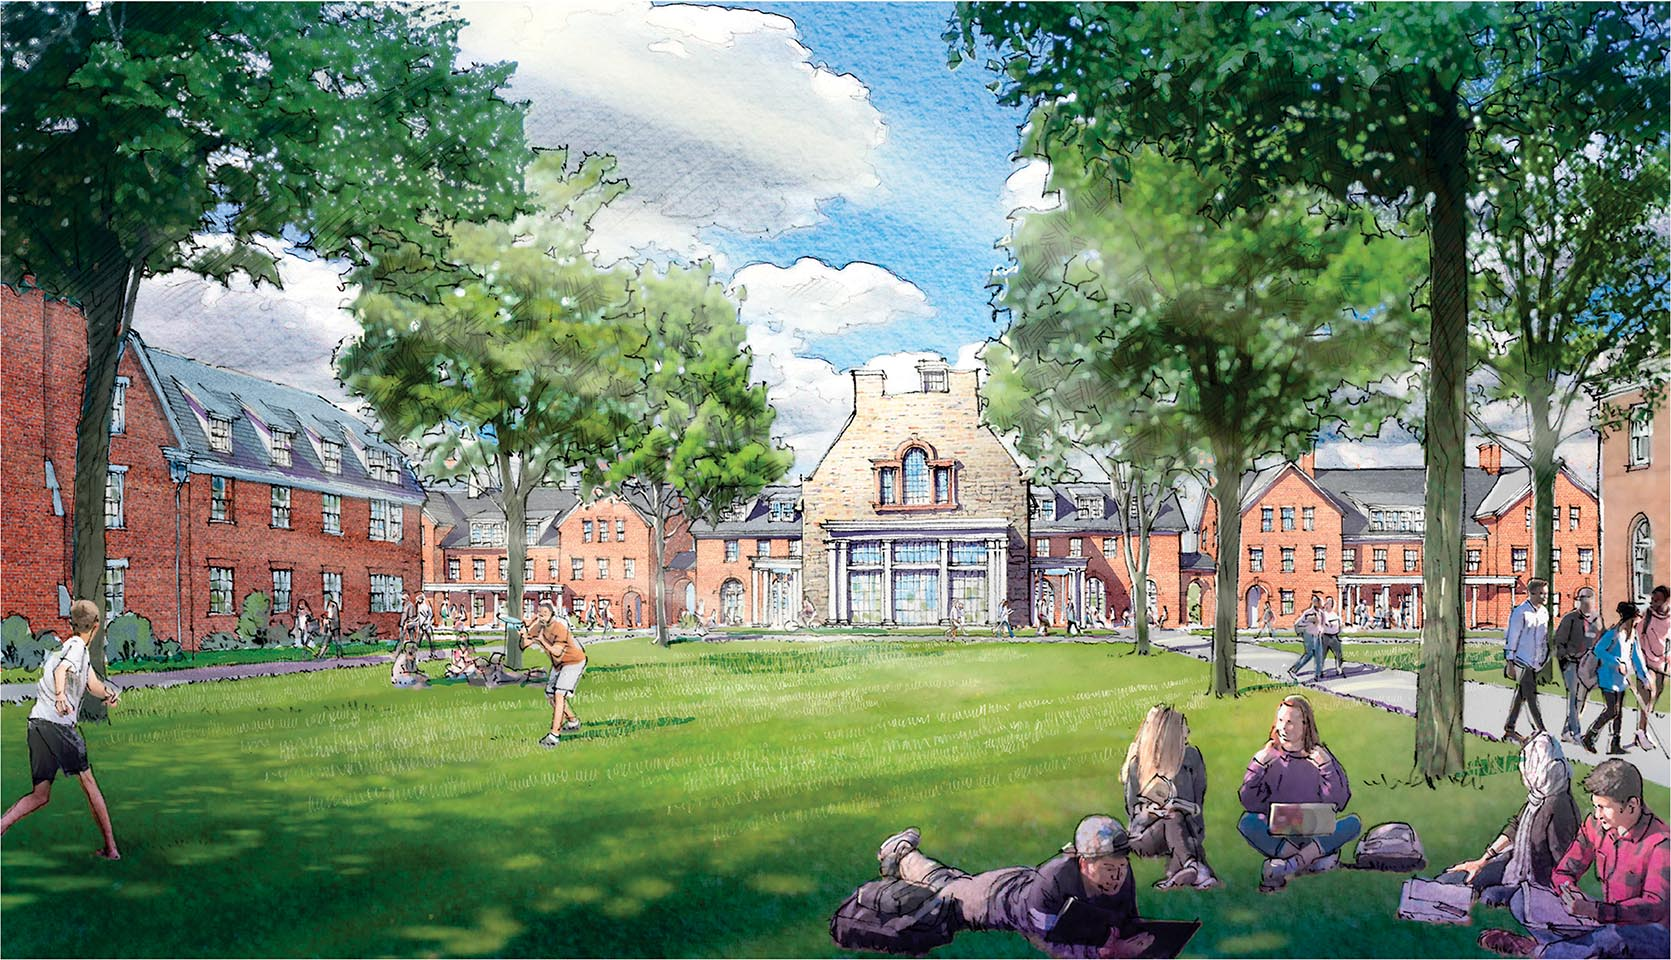 University Releases More Details for Lower Campus, Plans for New Residential Commons